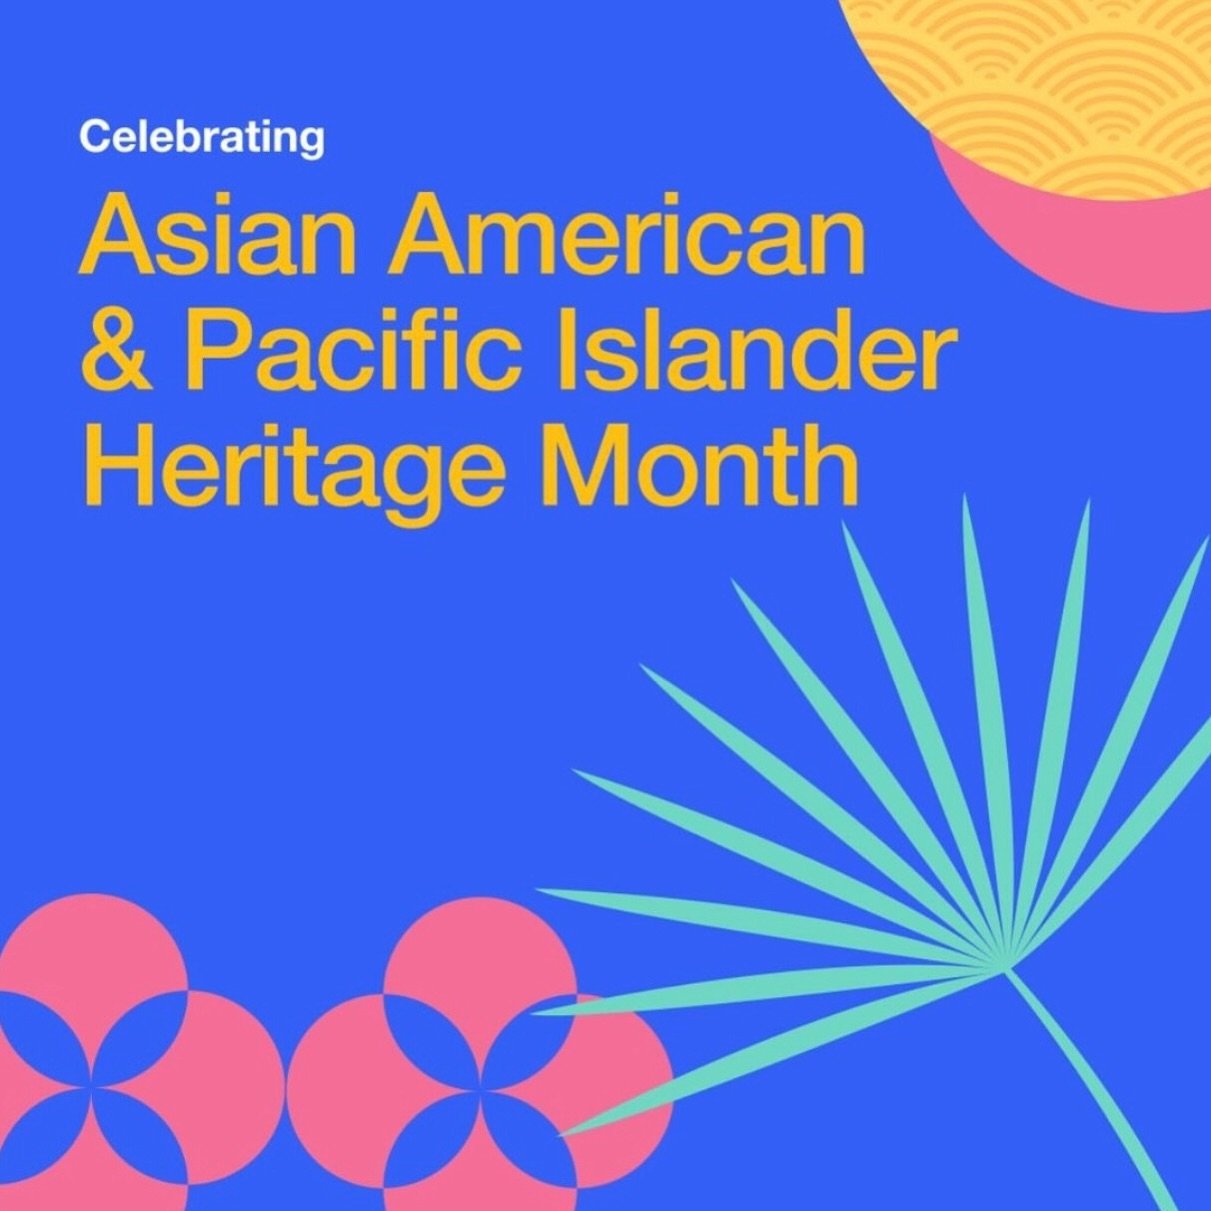 May is a month of celebration and recognition for the rich cultural heritage and contributions of Asian Americans and Pacific Islanders (AAPI) in the United States. At Keller Williams Pasadena, we proudly join in honoring this vibrant and diverse com